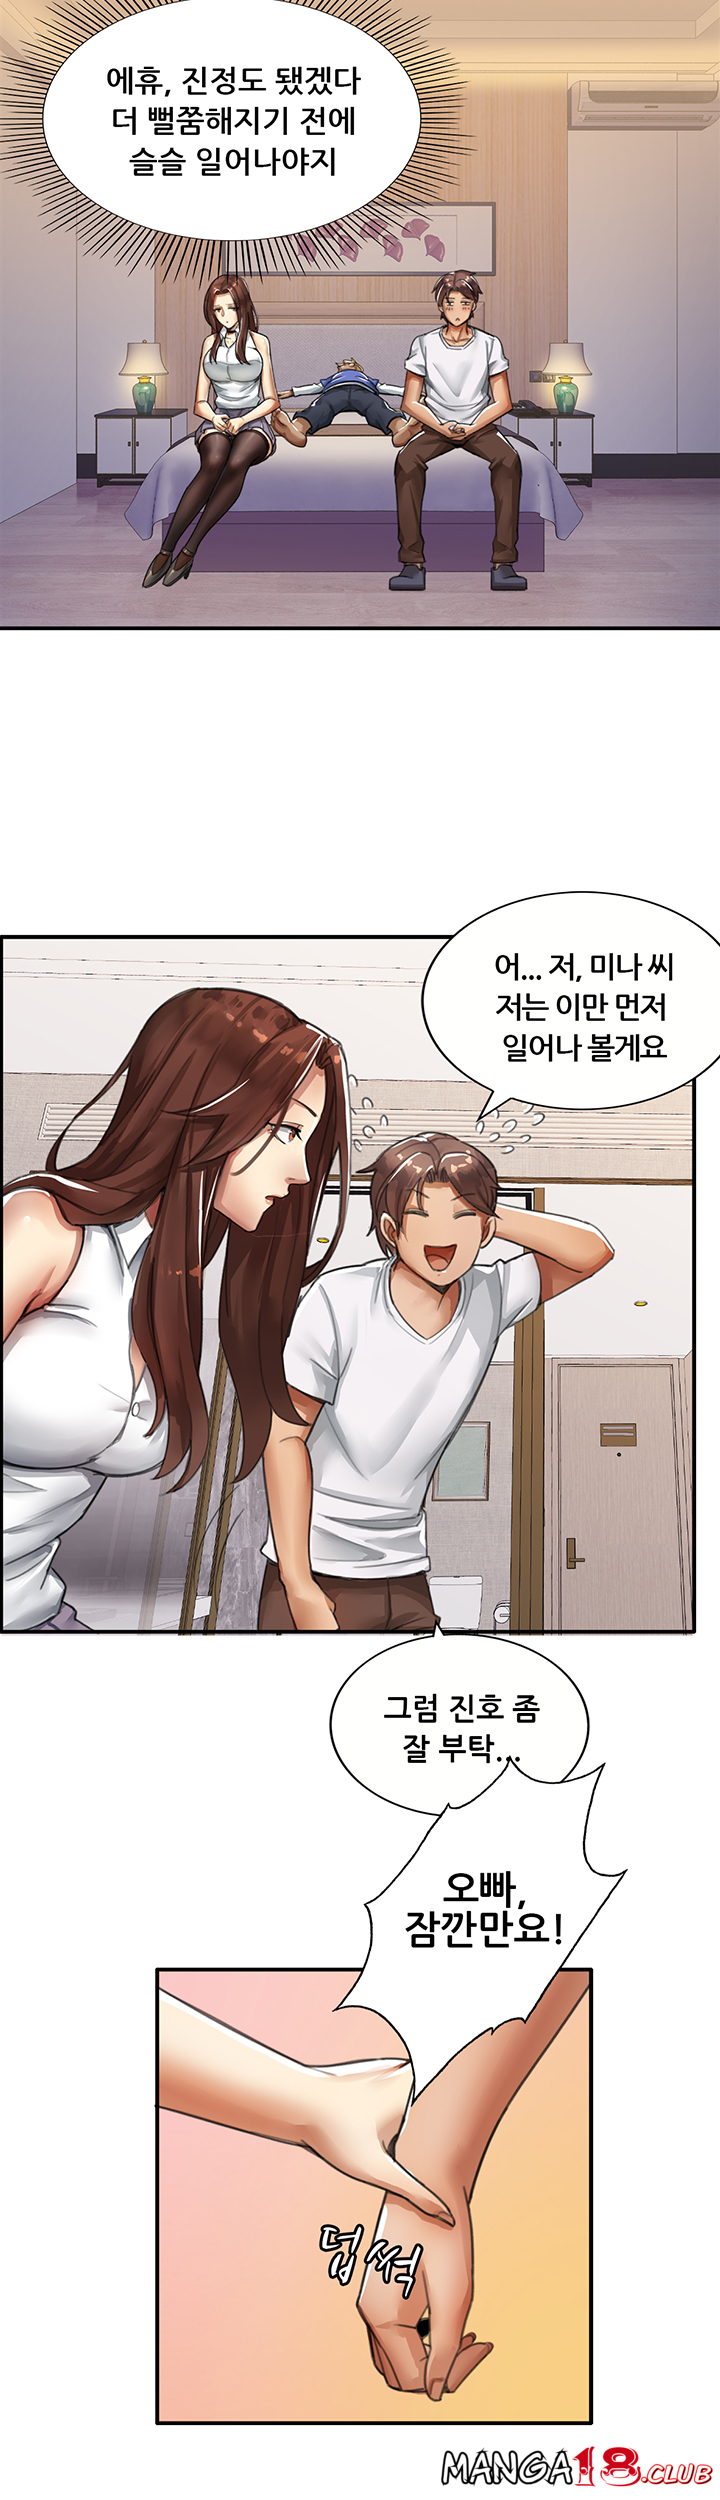 Lover Exchange Raw - Chapter 1 Page 45